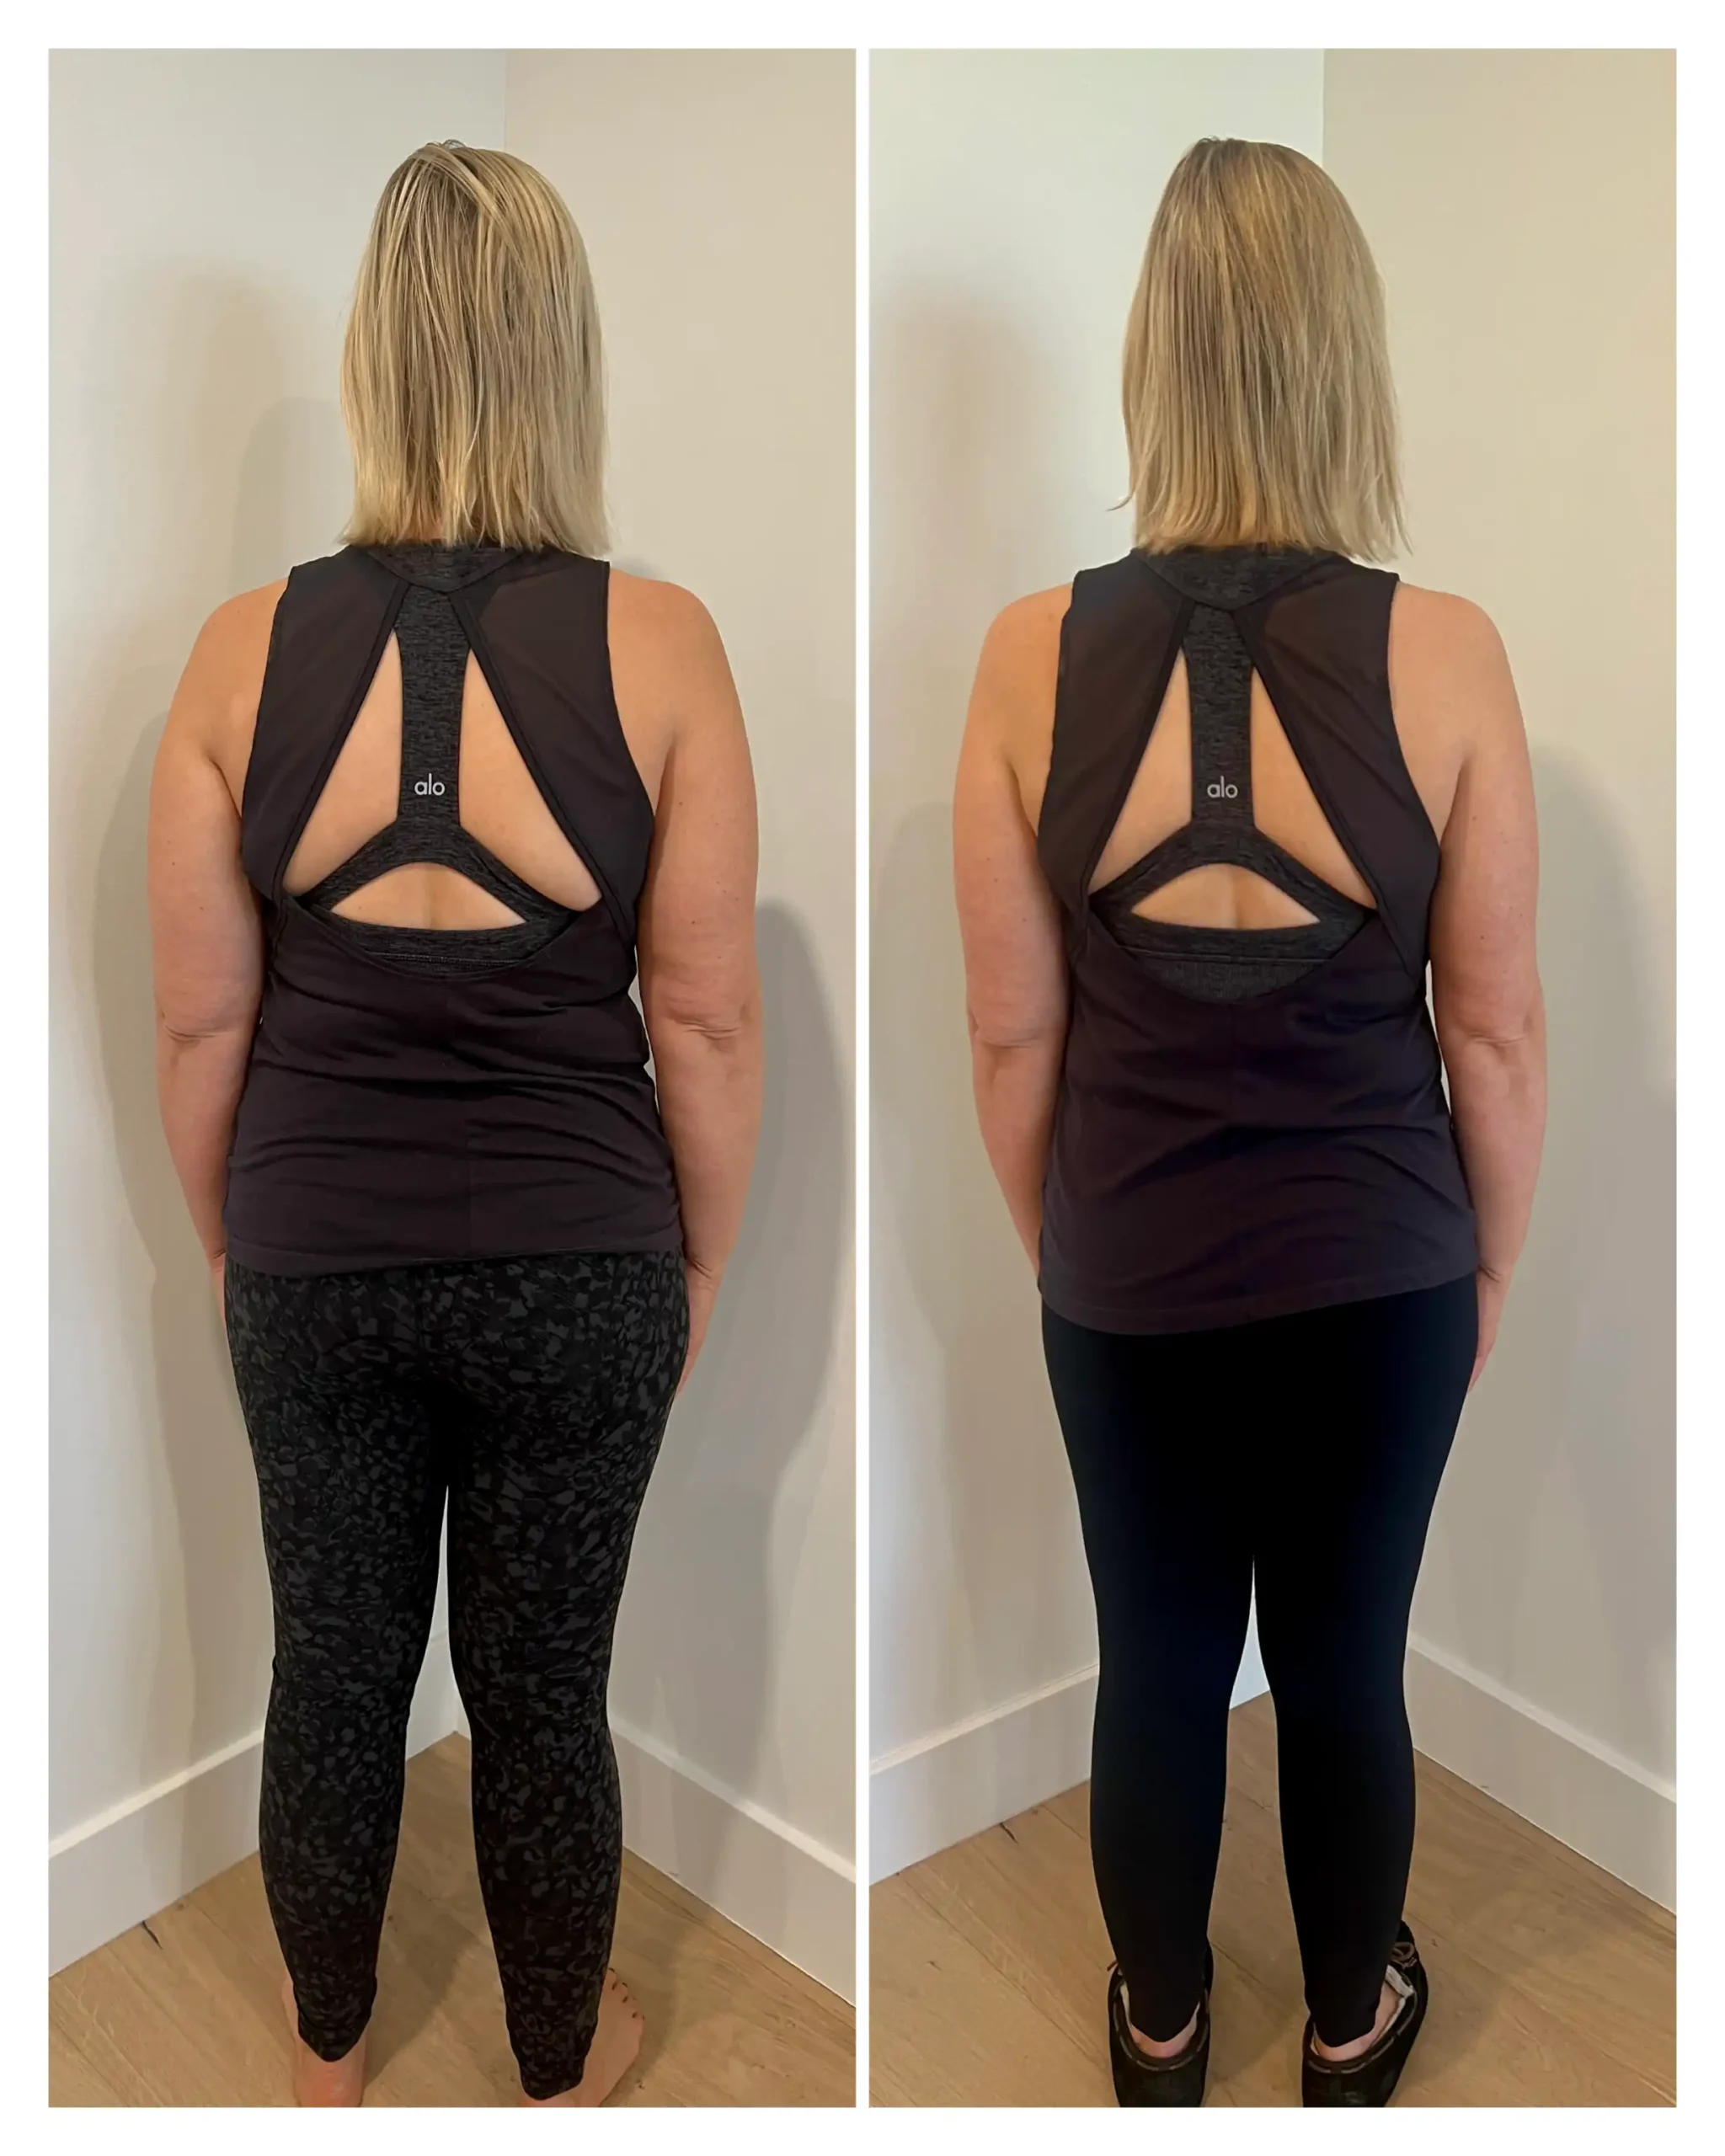 Melissa before and after weight loss - back view